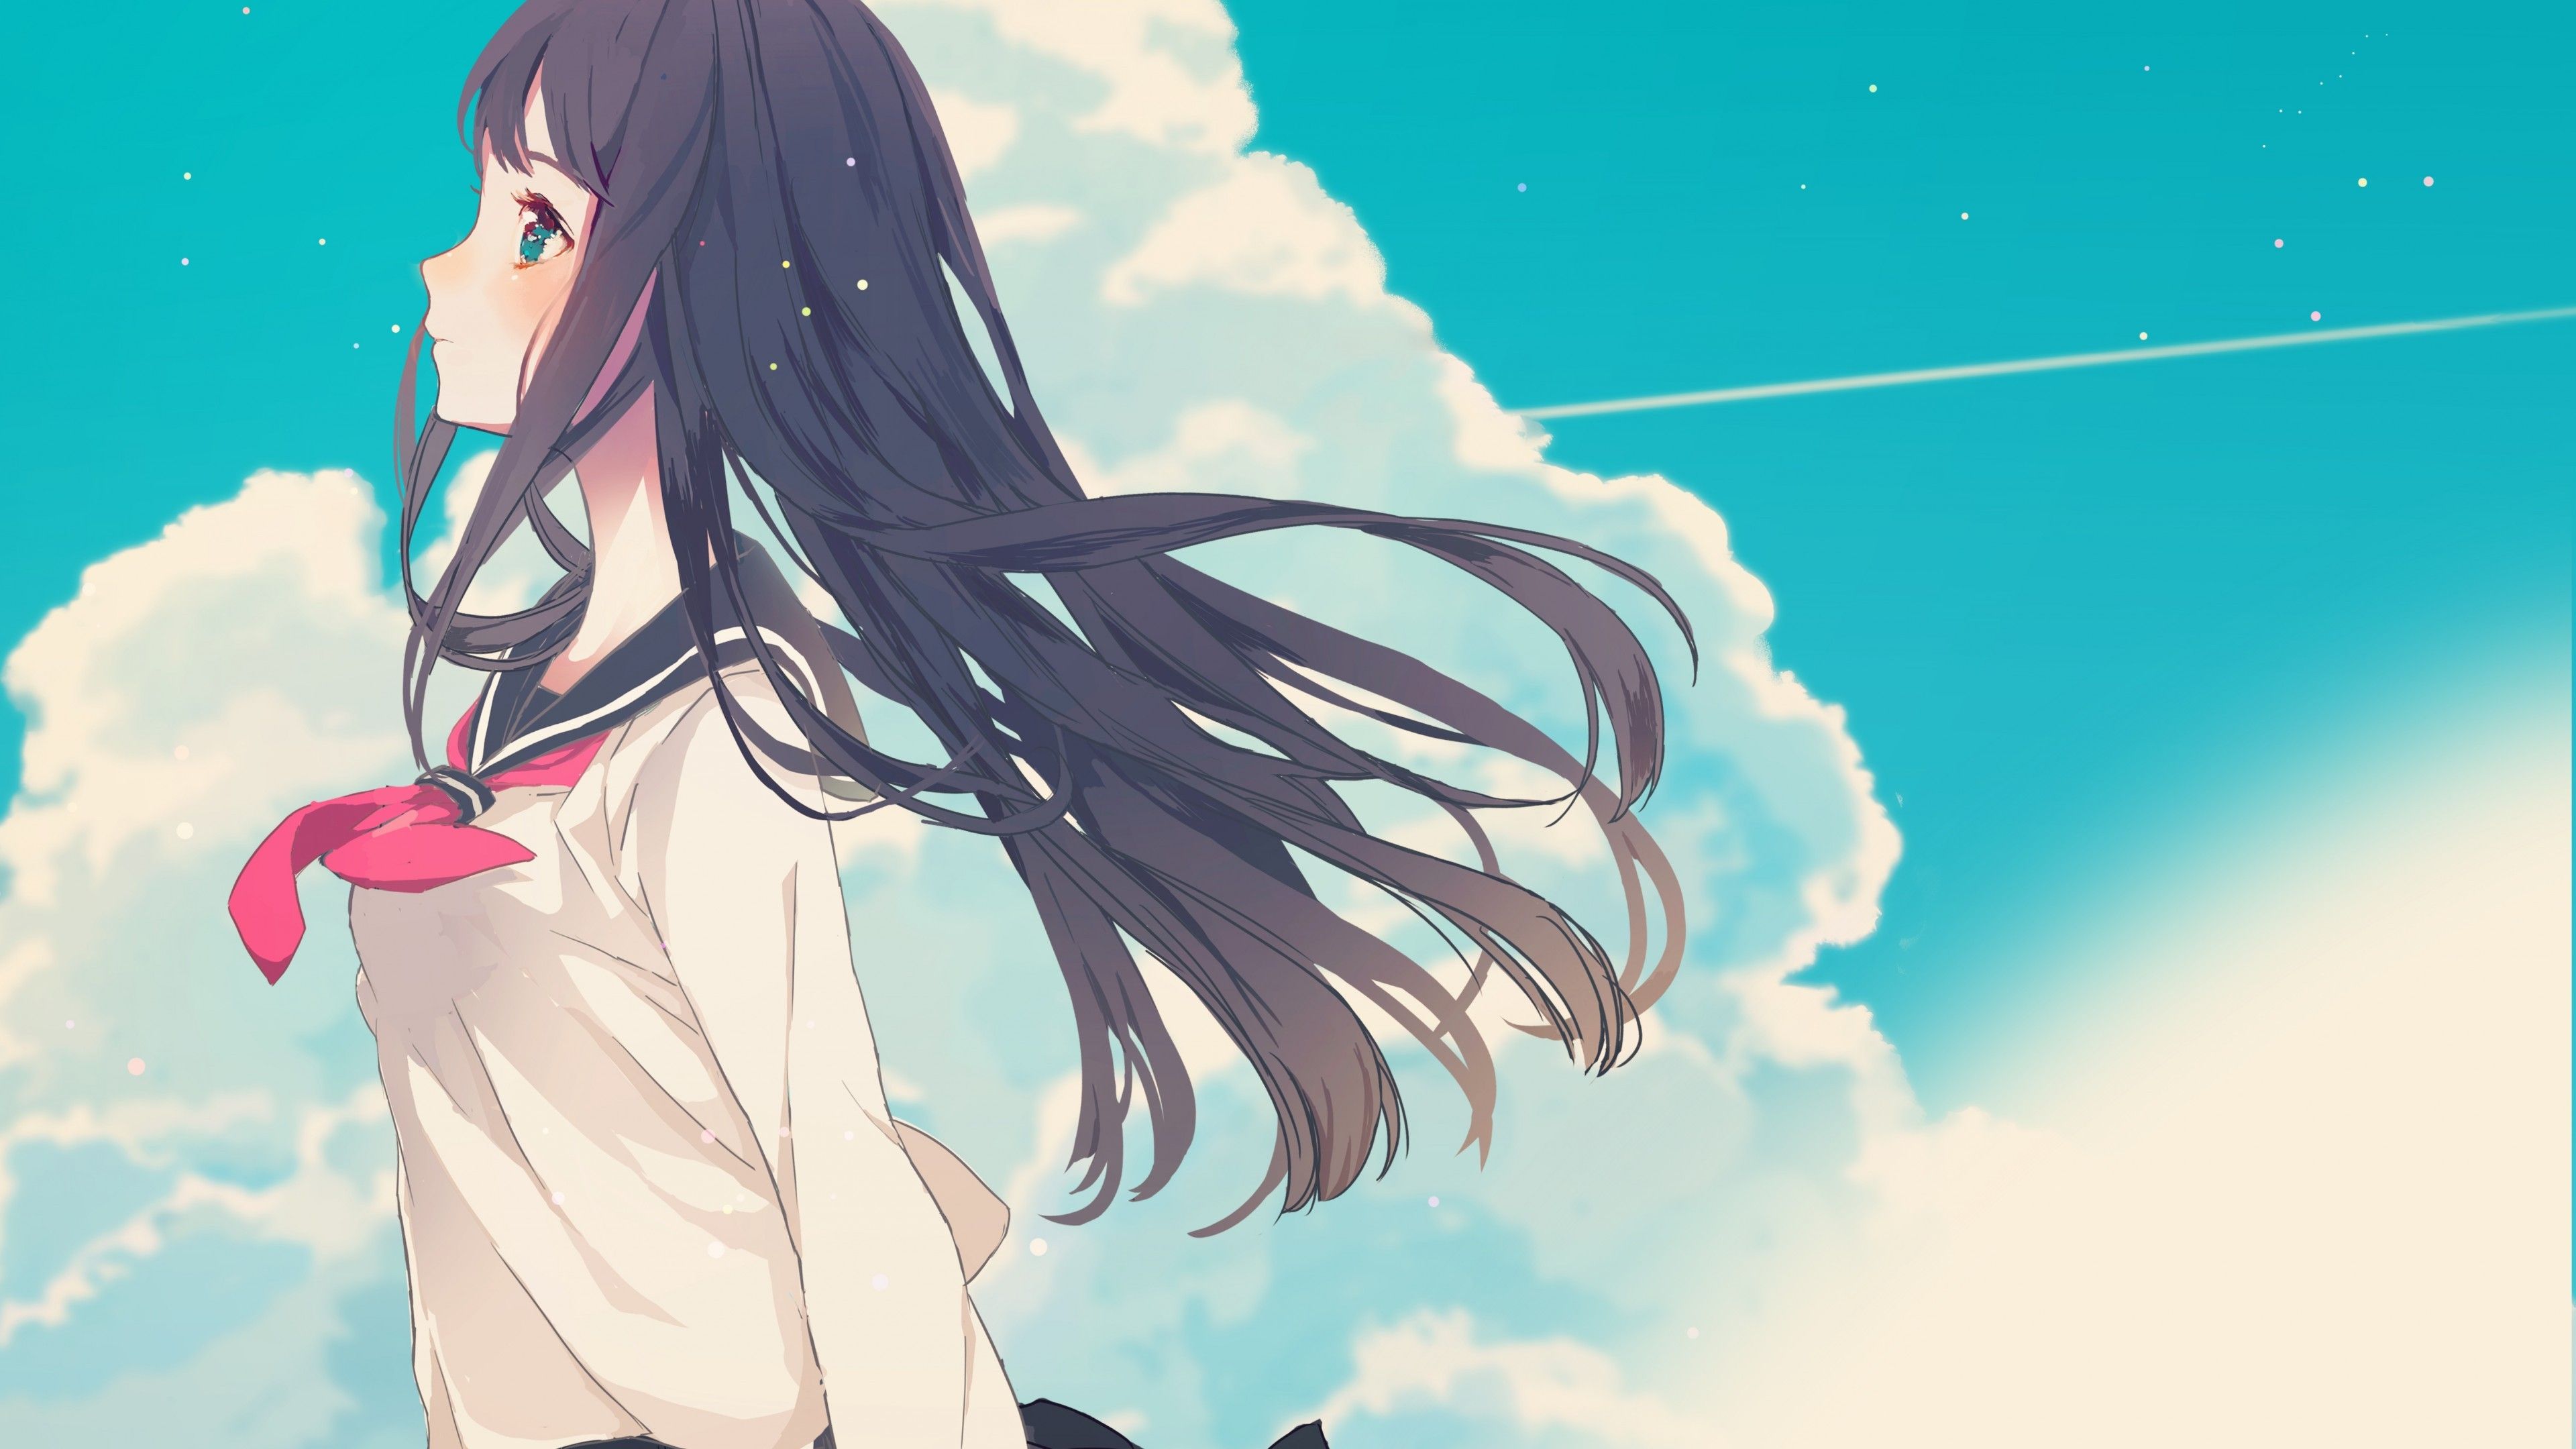 Download 3840x2160 Anime Girl, Profile View, School Uniform, Clouds, Sky Wallpaper for UHD TV